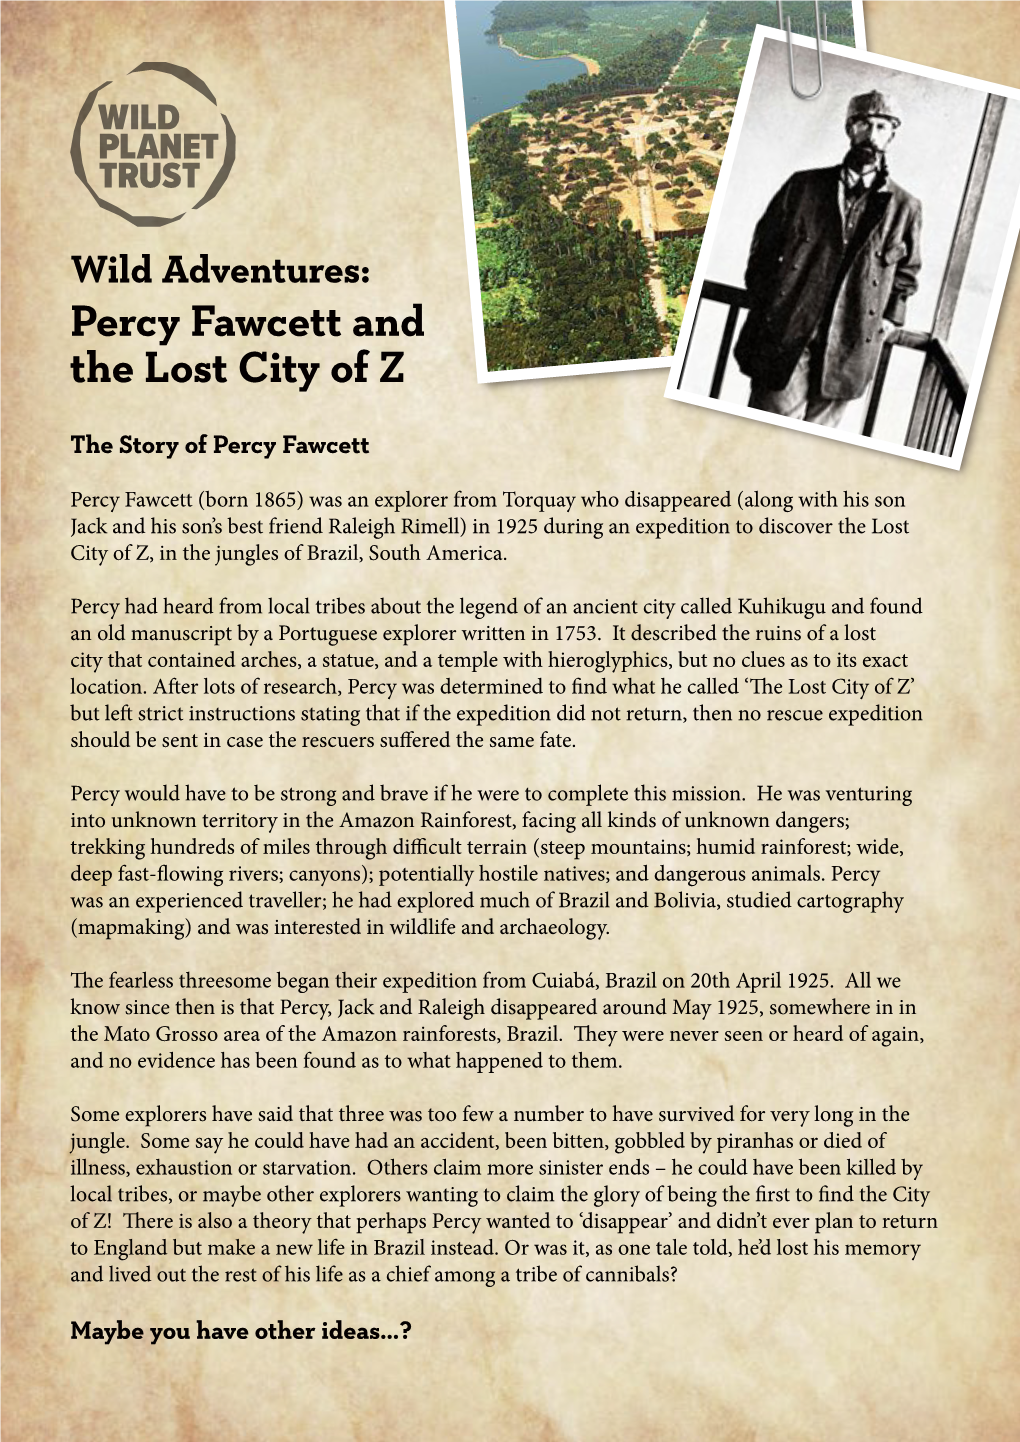 Wild Adventures: Percy Fawcett and the Lost City of Z